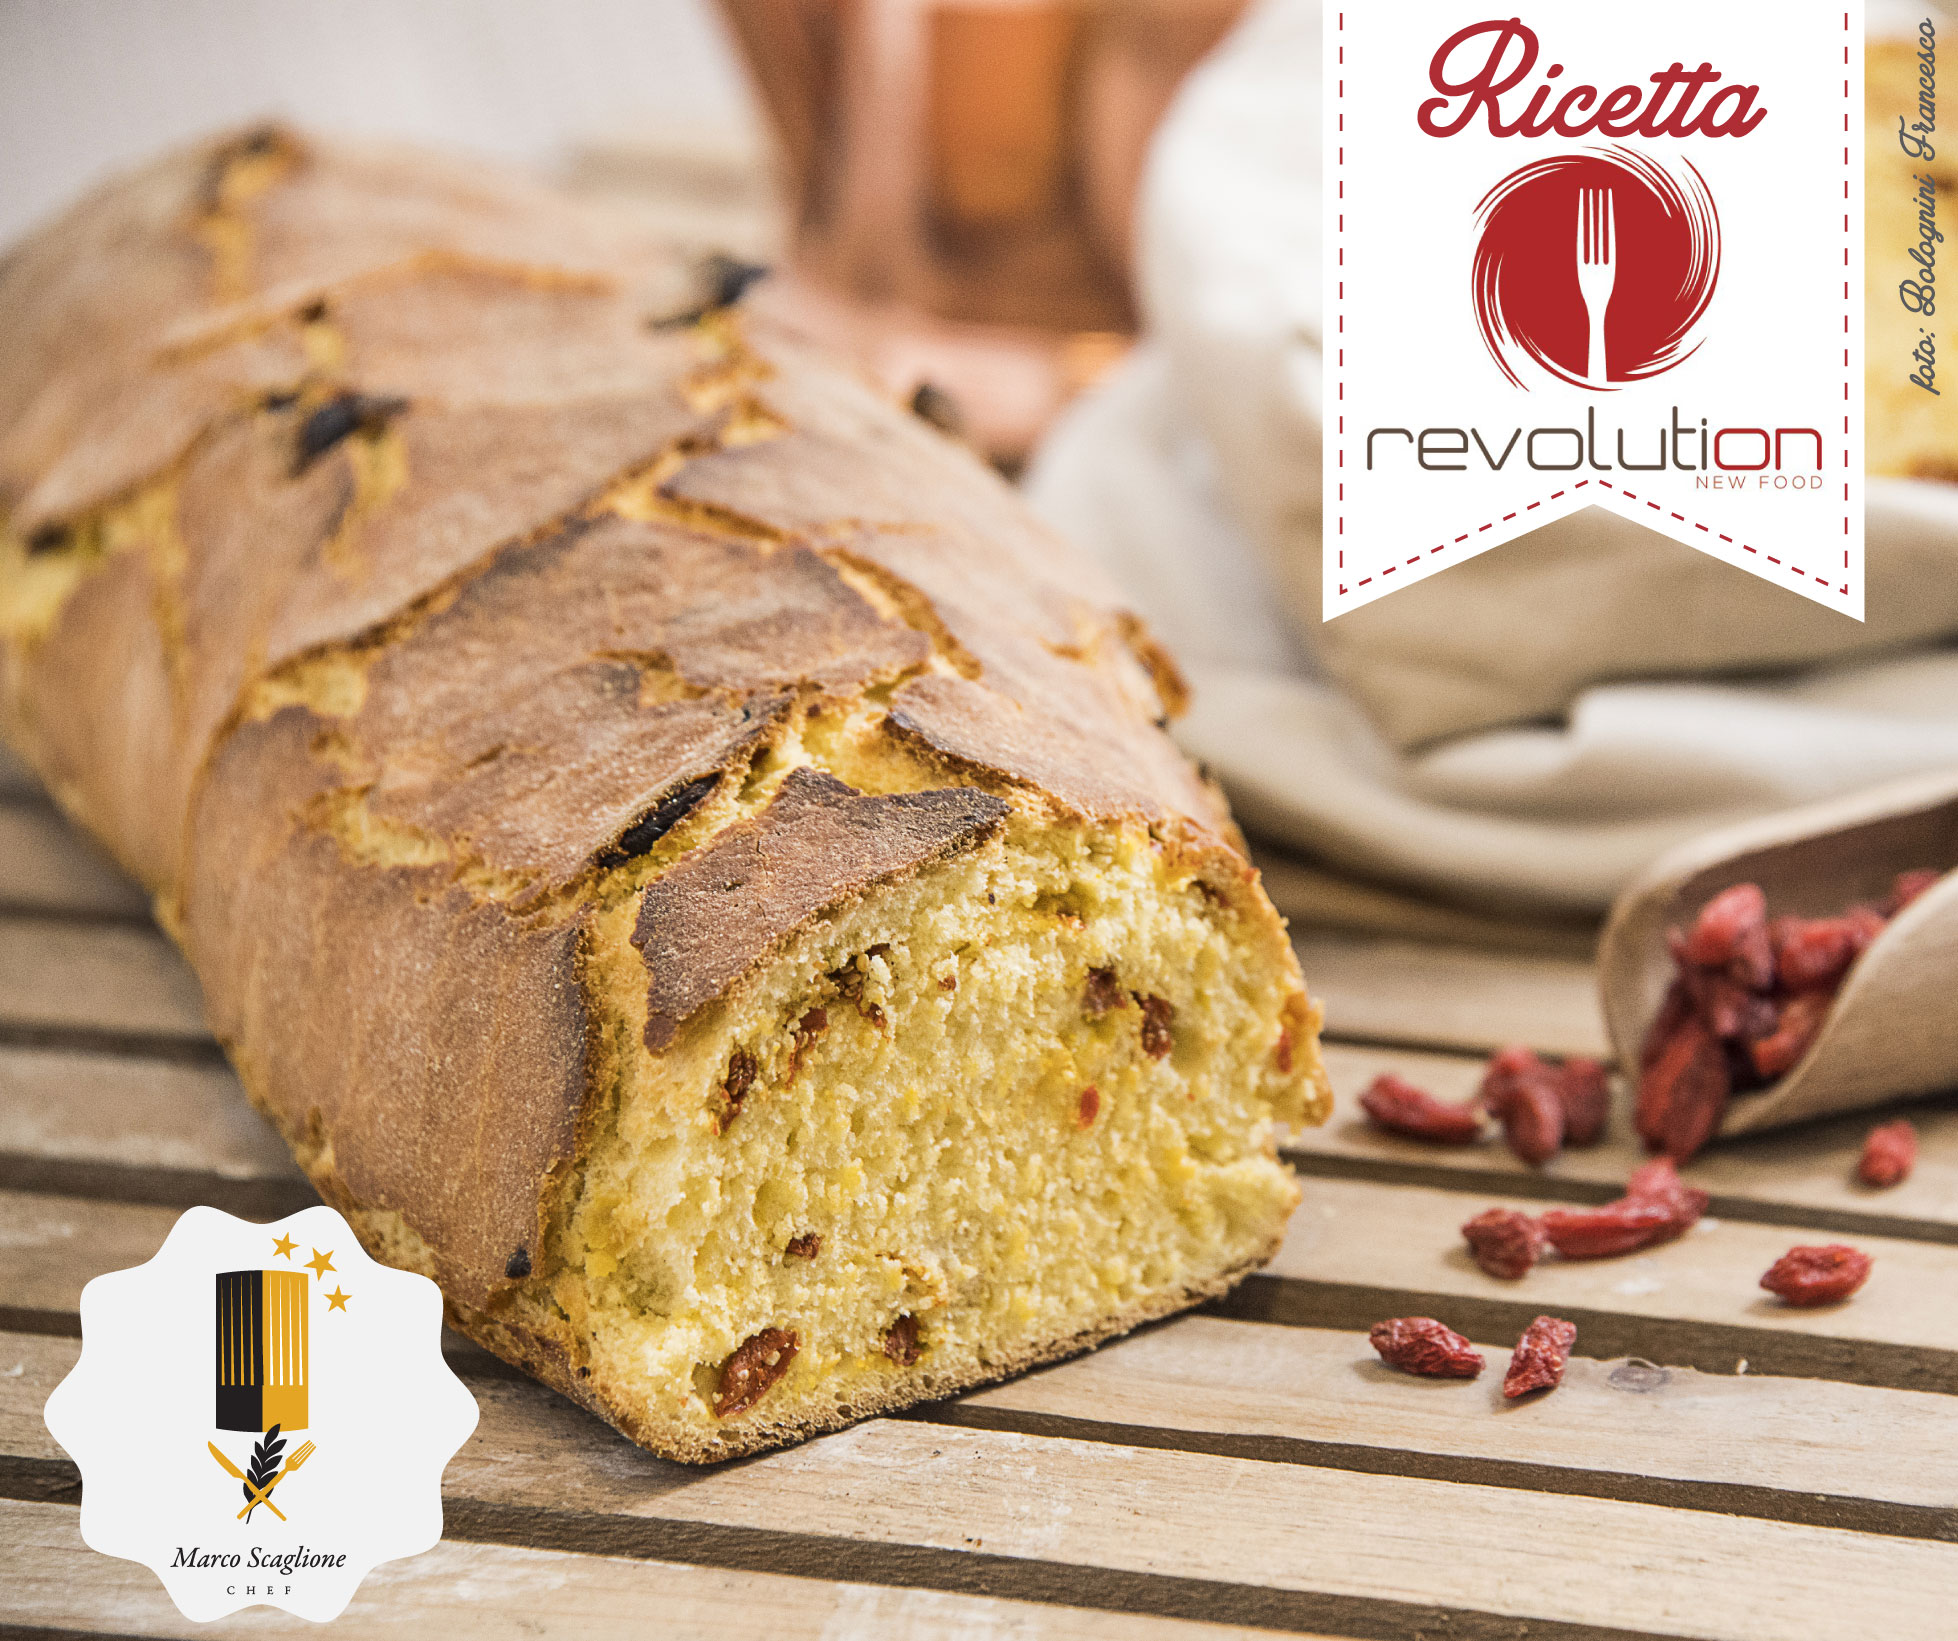 Gluten-free bread loaf with quinoa flour and goji berries